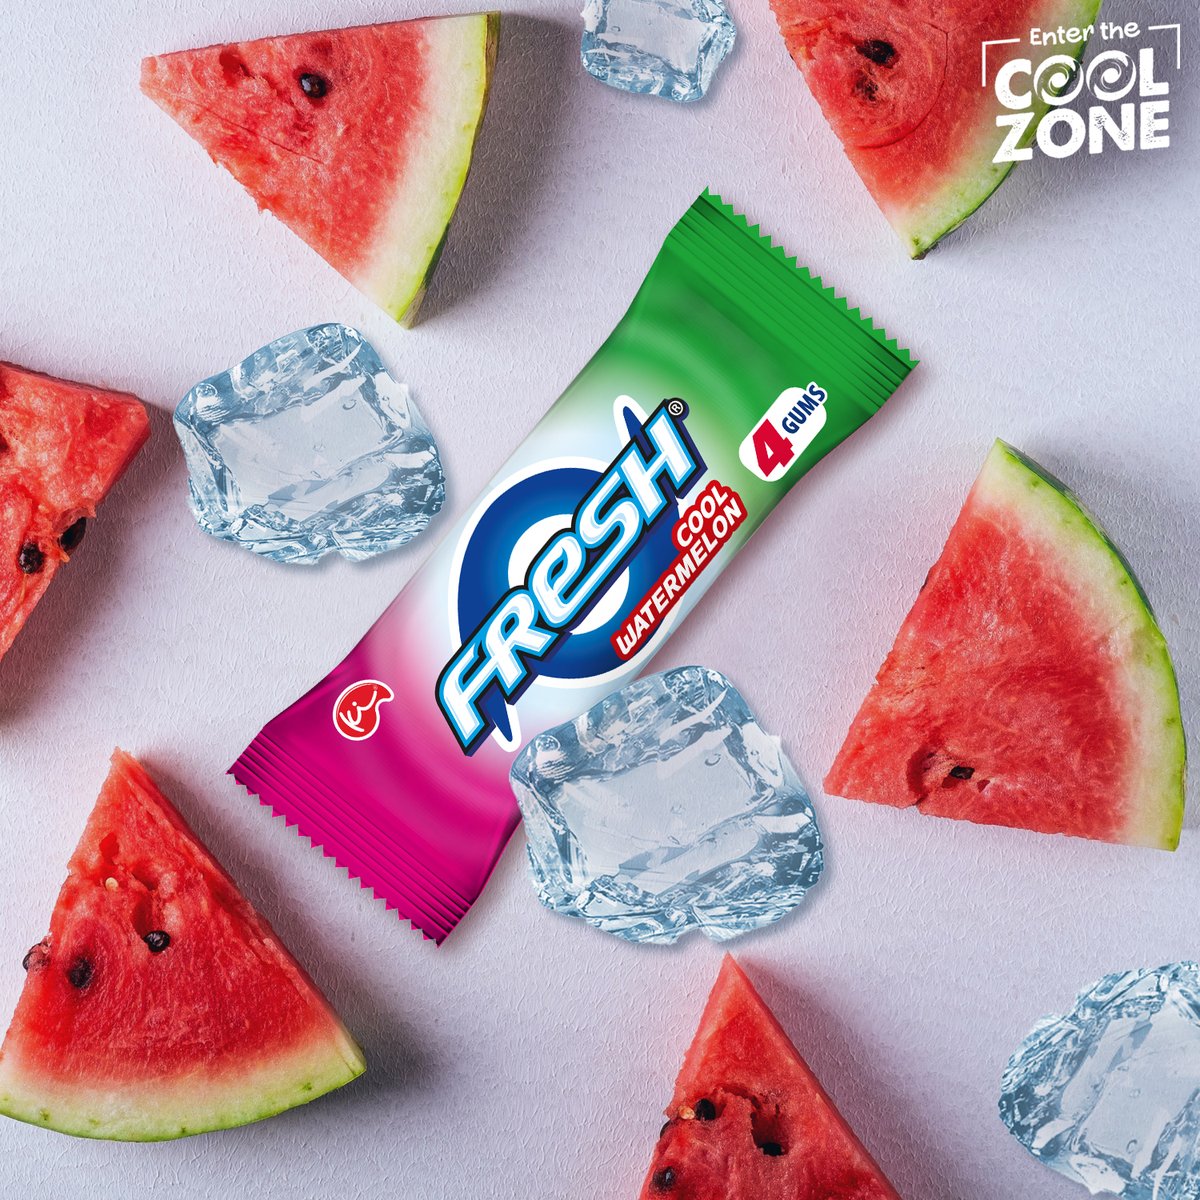 Everyone has that buddy who’s always chewing gum. Since you’re here, we suspect you are that buddy😉 #EnterTheCoolZone #FreshChewingGum